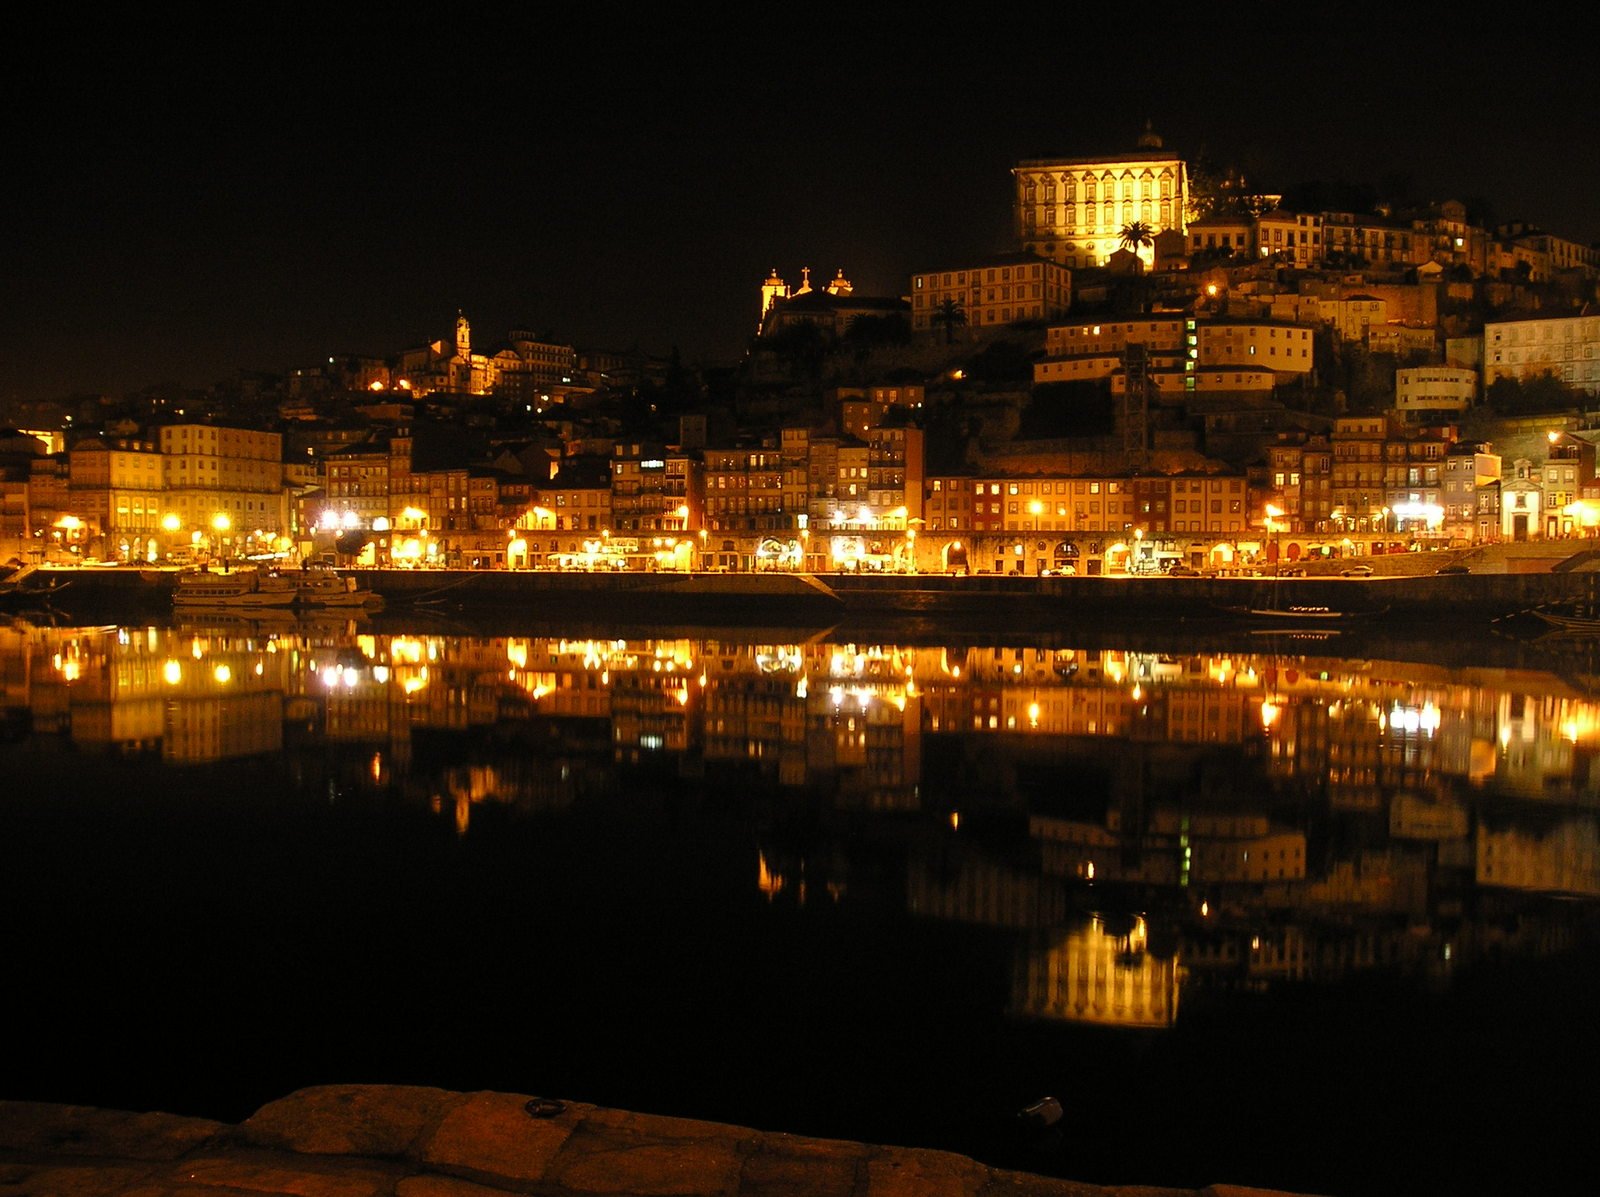 the night view of buildings on a hill from across a lake